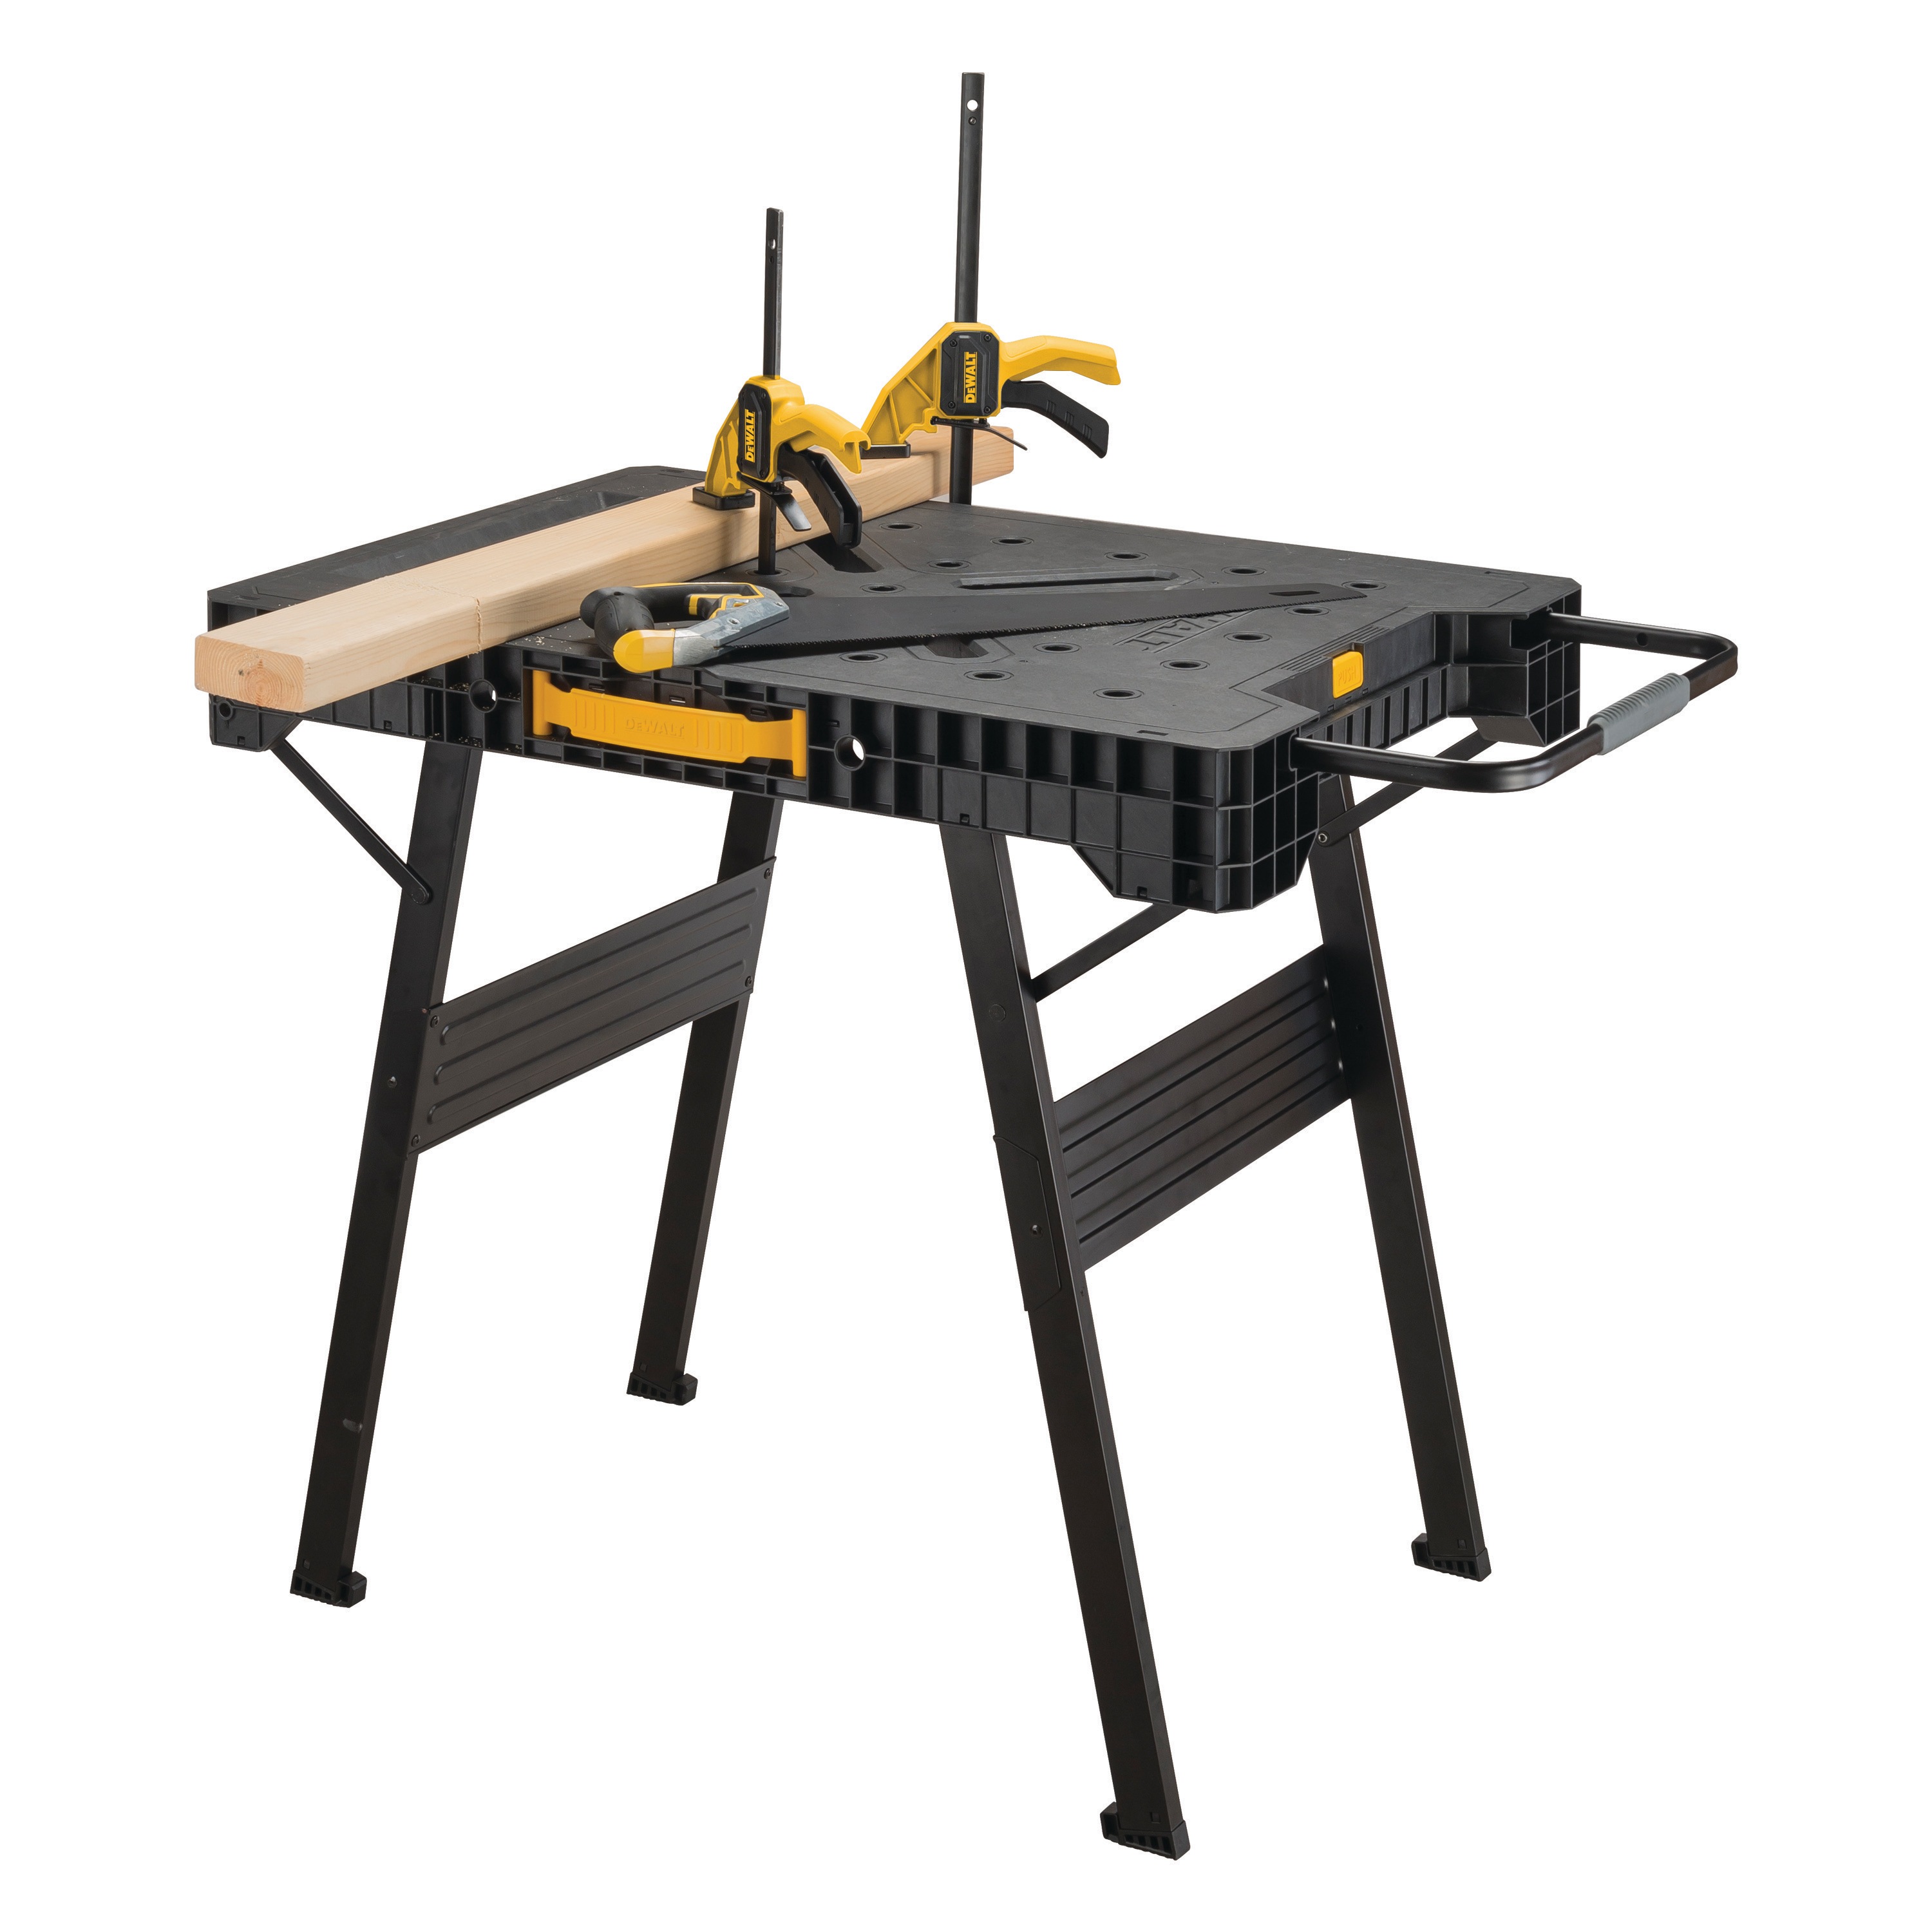 Profile of an express folding workbench with tools placed on it.